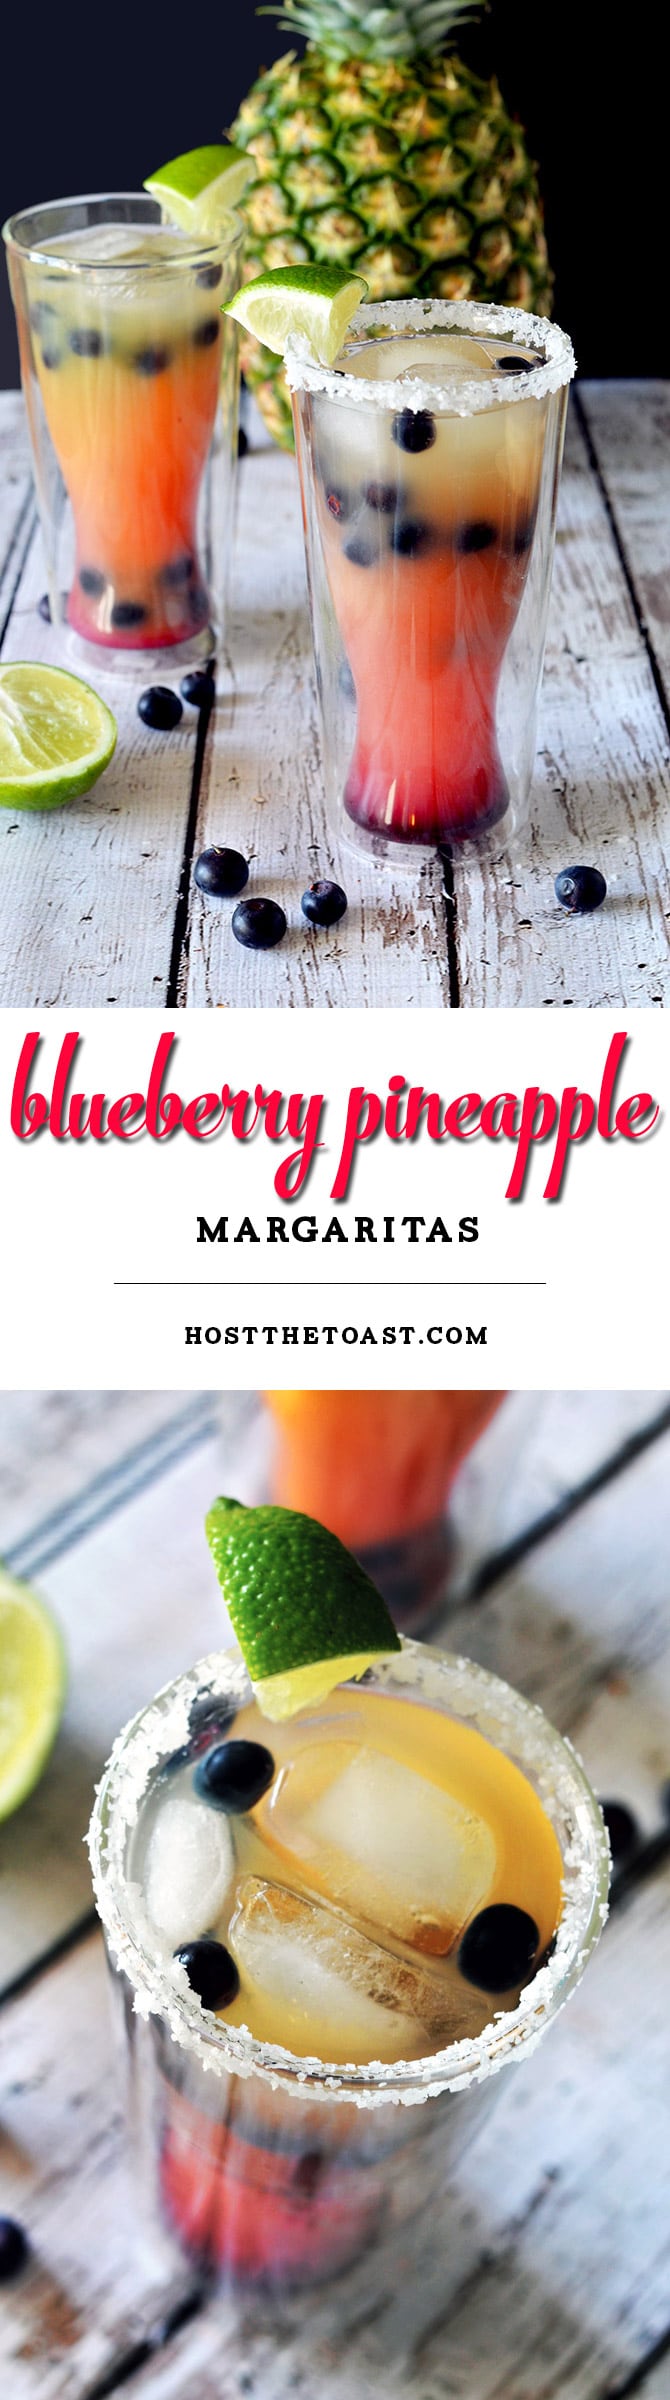 Blueberry Pineapple Margaritas. A great, fruit-flavored cocktail that's perfect for girls' nights or Cinco de Mayo! | hostthetoast.com